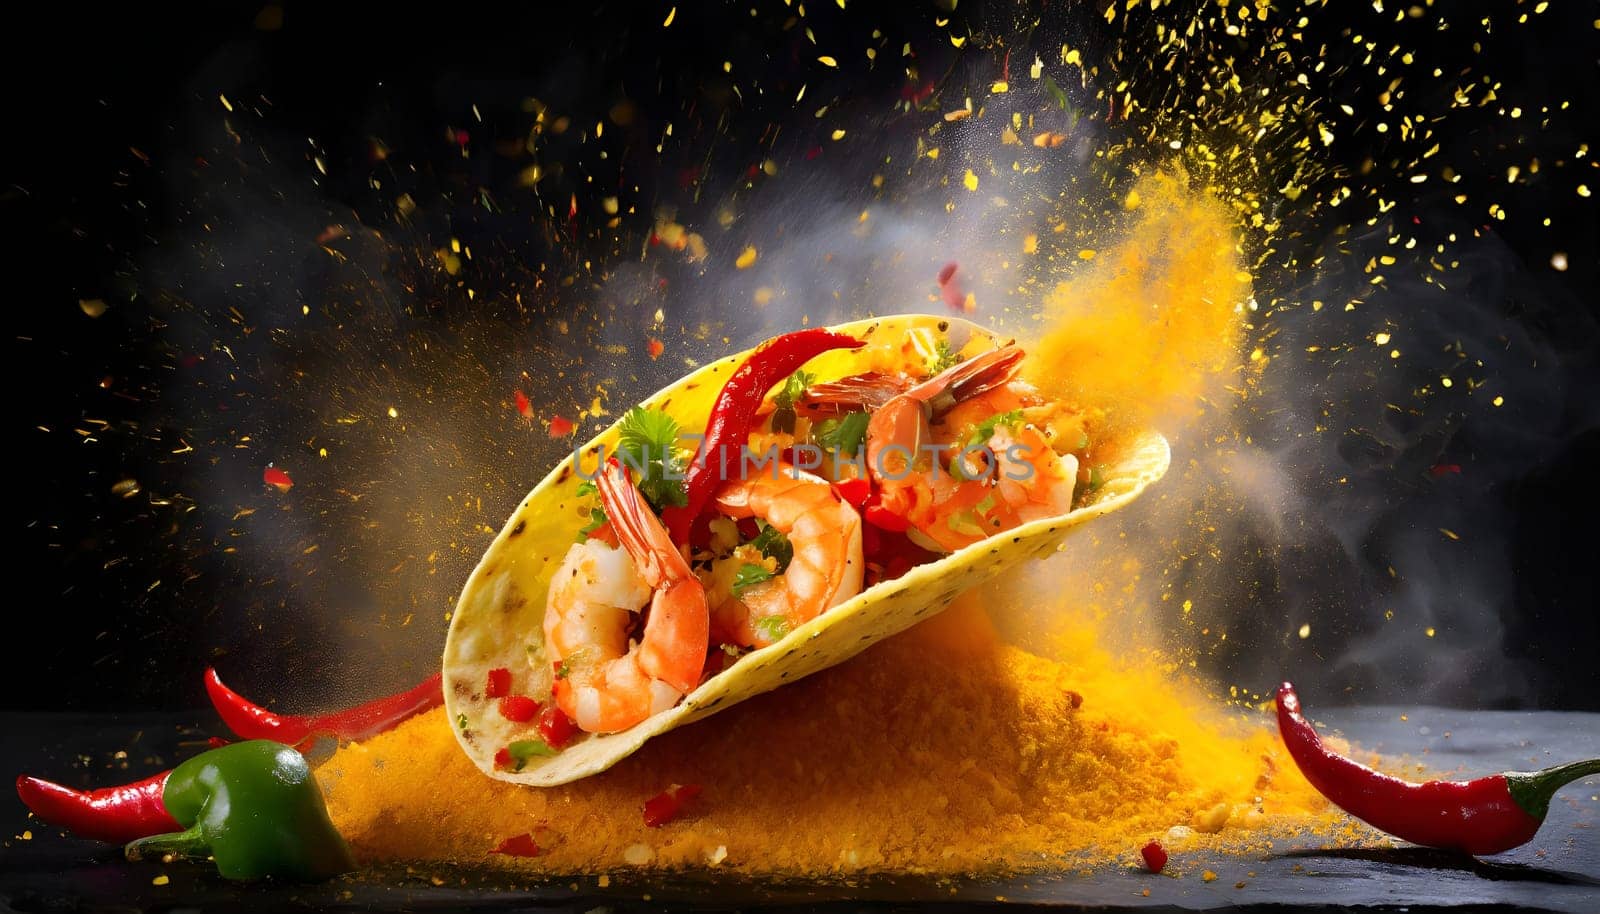 Powerful explosion of yellow dust from a shrimp taco. Falling tacos. by Designlab